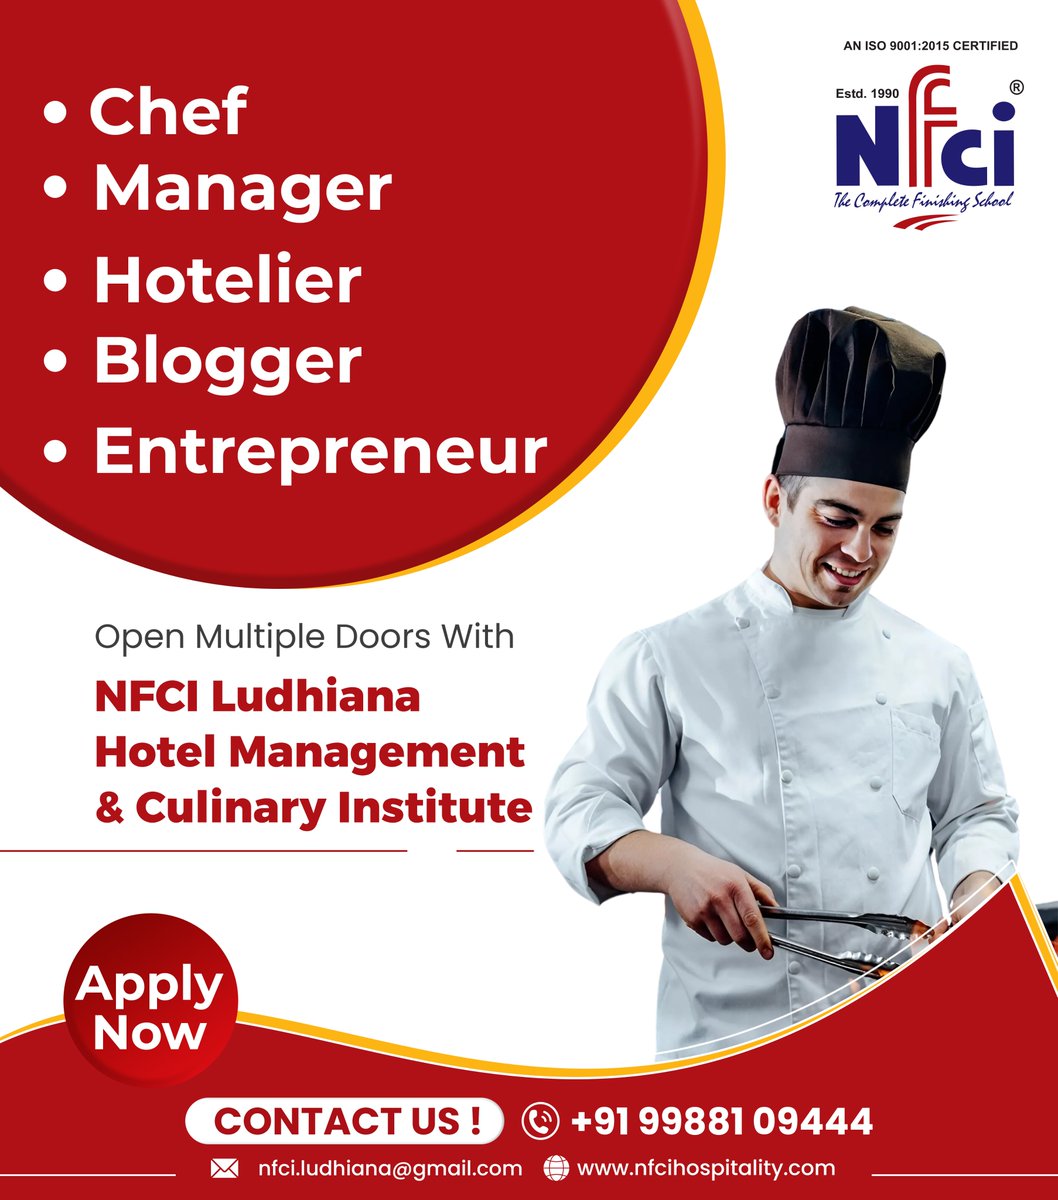 🚪🔑 Open multiple doors with NFCI Ludhiana! 🎓 Whether you want to become a chef, manager, hotelier, blogger, or entrepreneur, contact us today to kick-start your career! 💼👨‍🍳🏨💻🚀
.
.
.
.
#nfciludhiana #culinaryschool #cheftraining #hospitalitymanagement #entrepreneurship